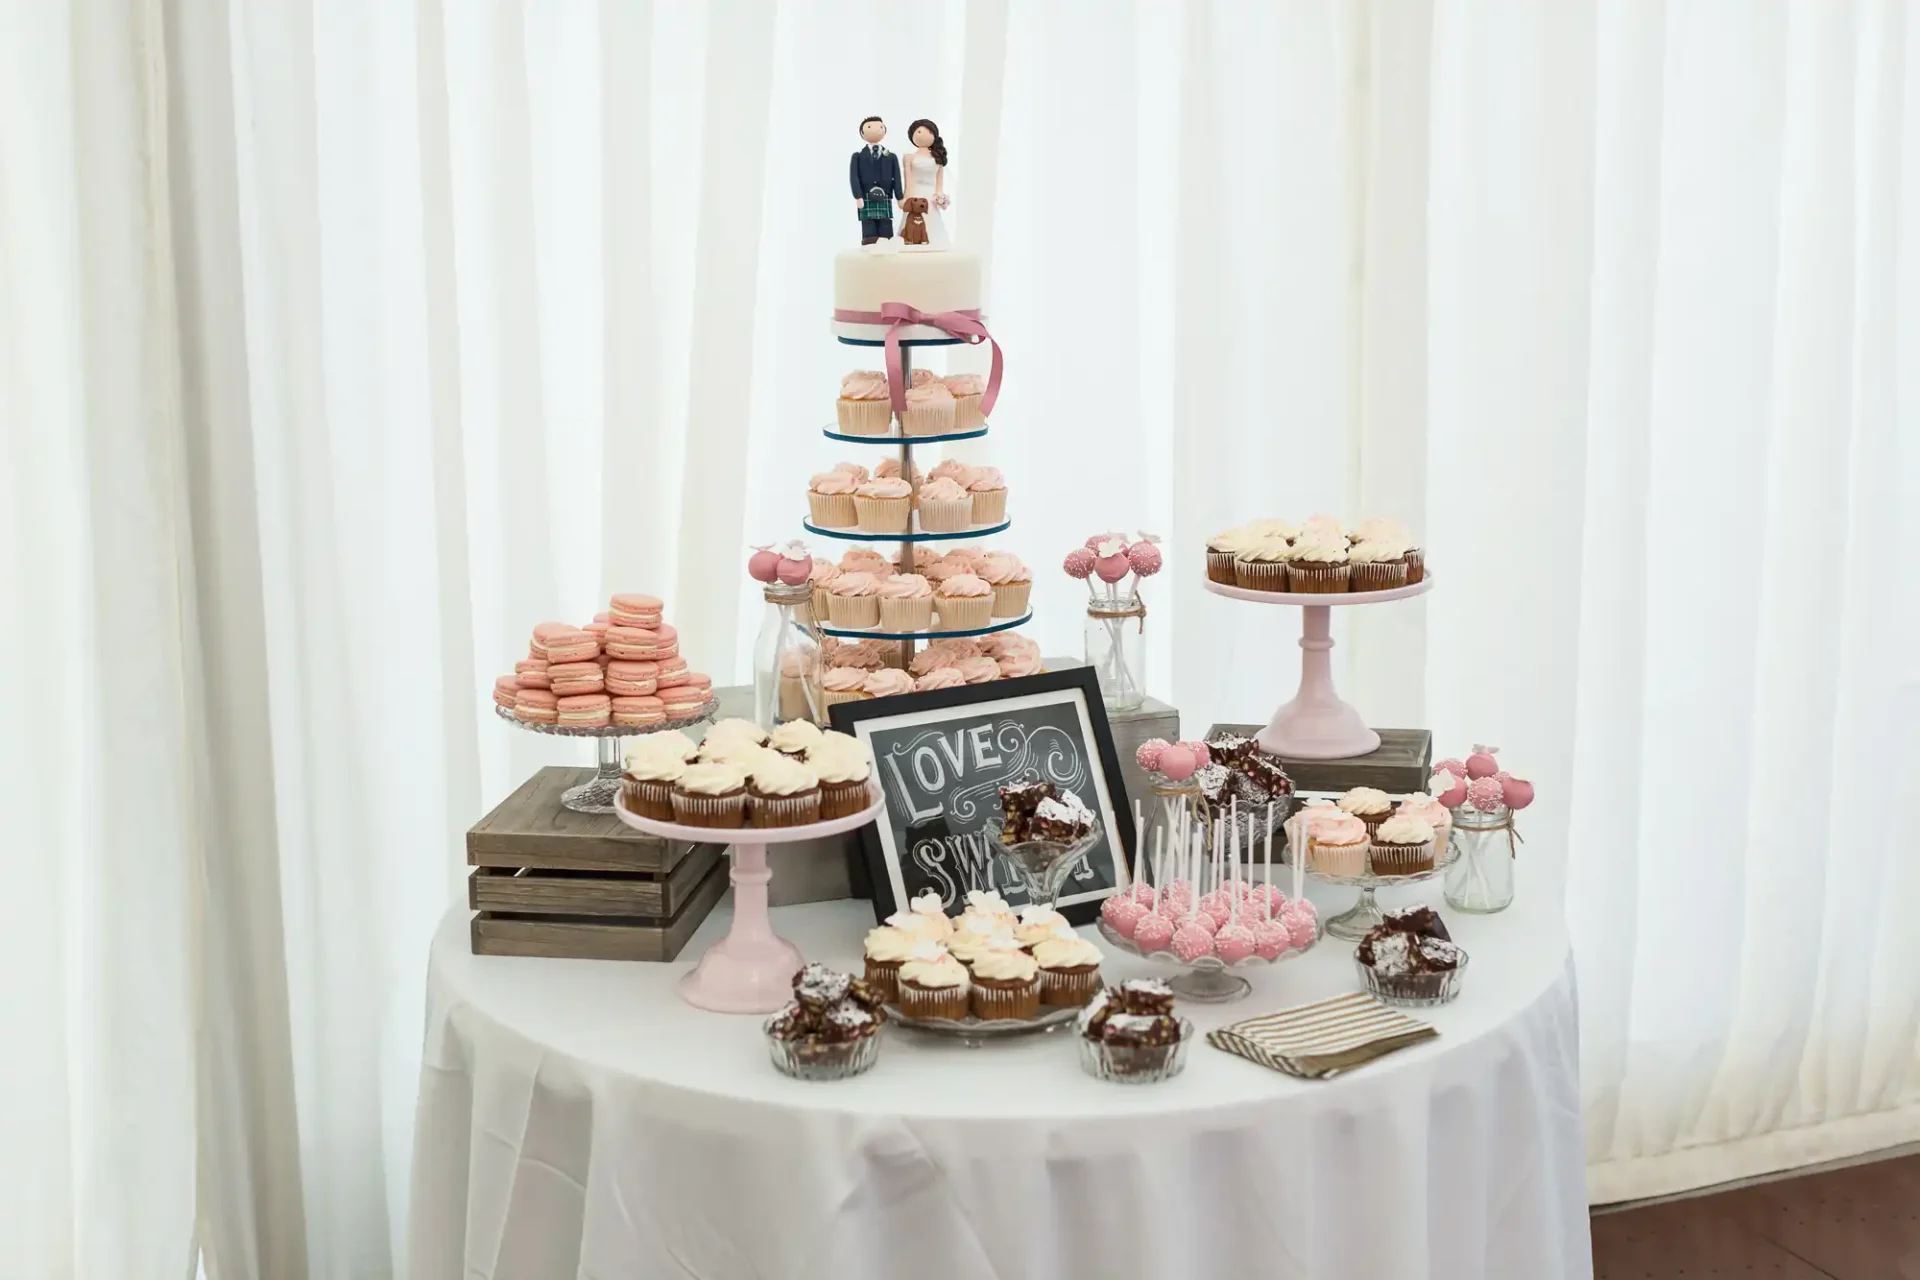 A wedding dessert table with macarons, cupcakes, and a cake topped with a figurine of a couple, set against a backdrop of white curtains.